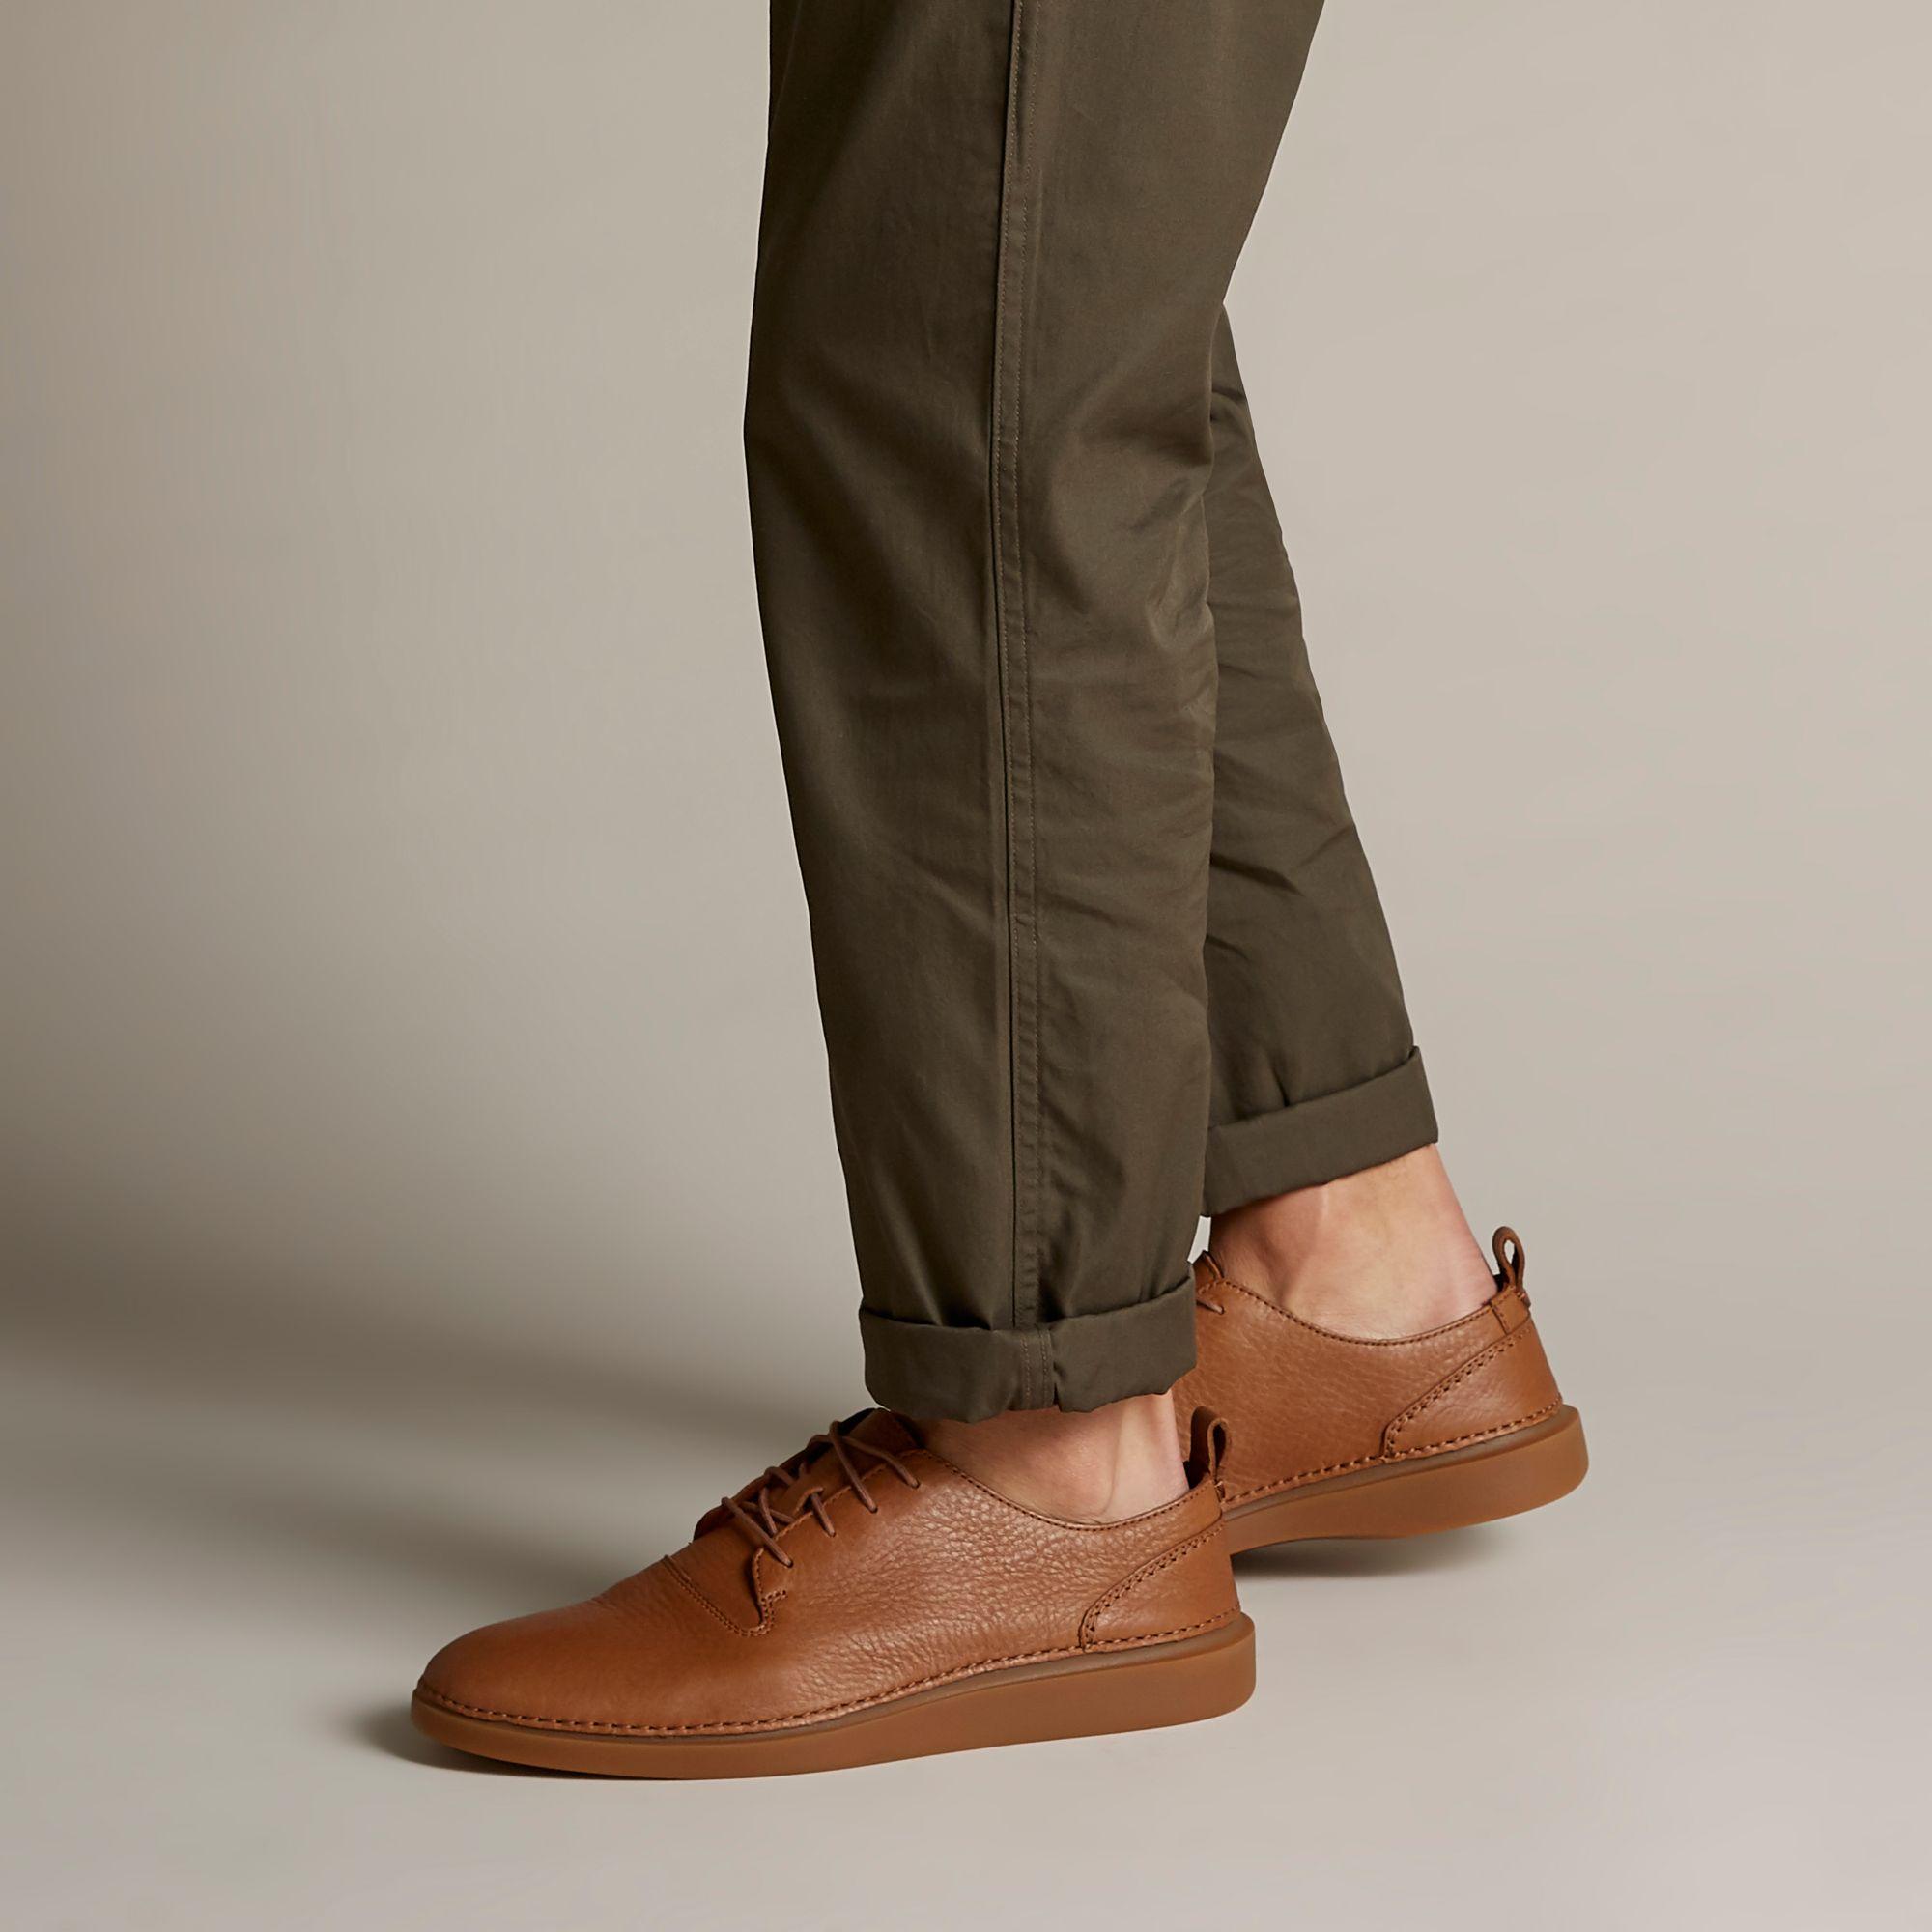 Clarks Hale Lace in Tan Leather (Brown 